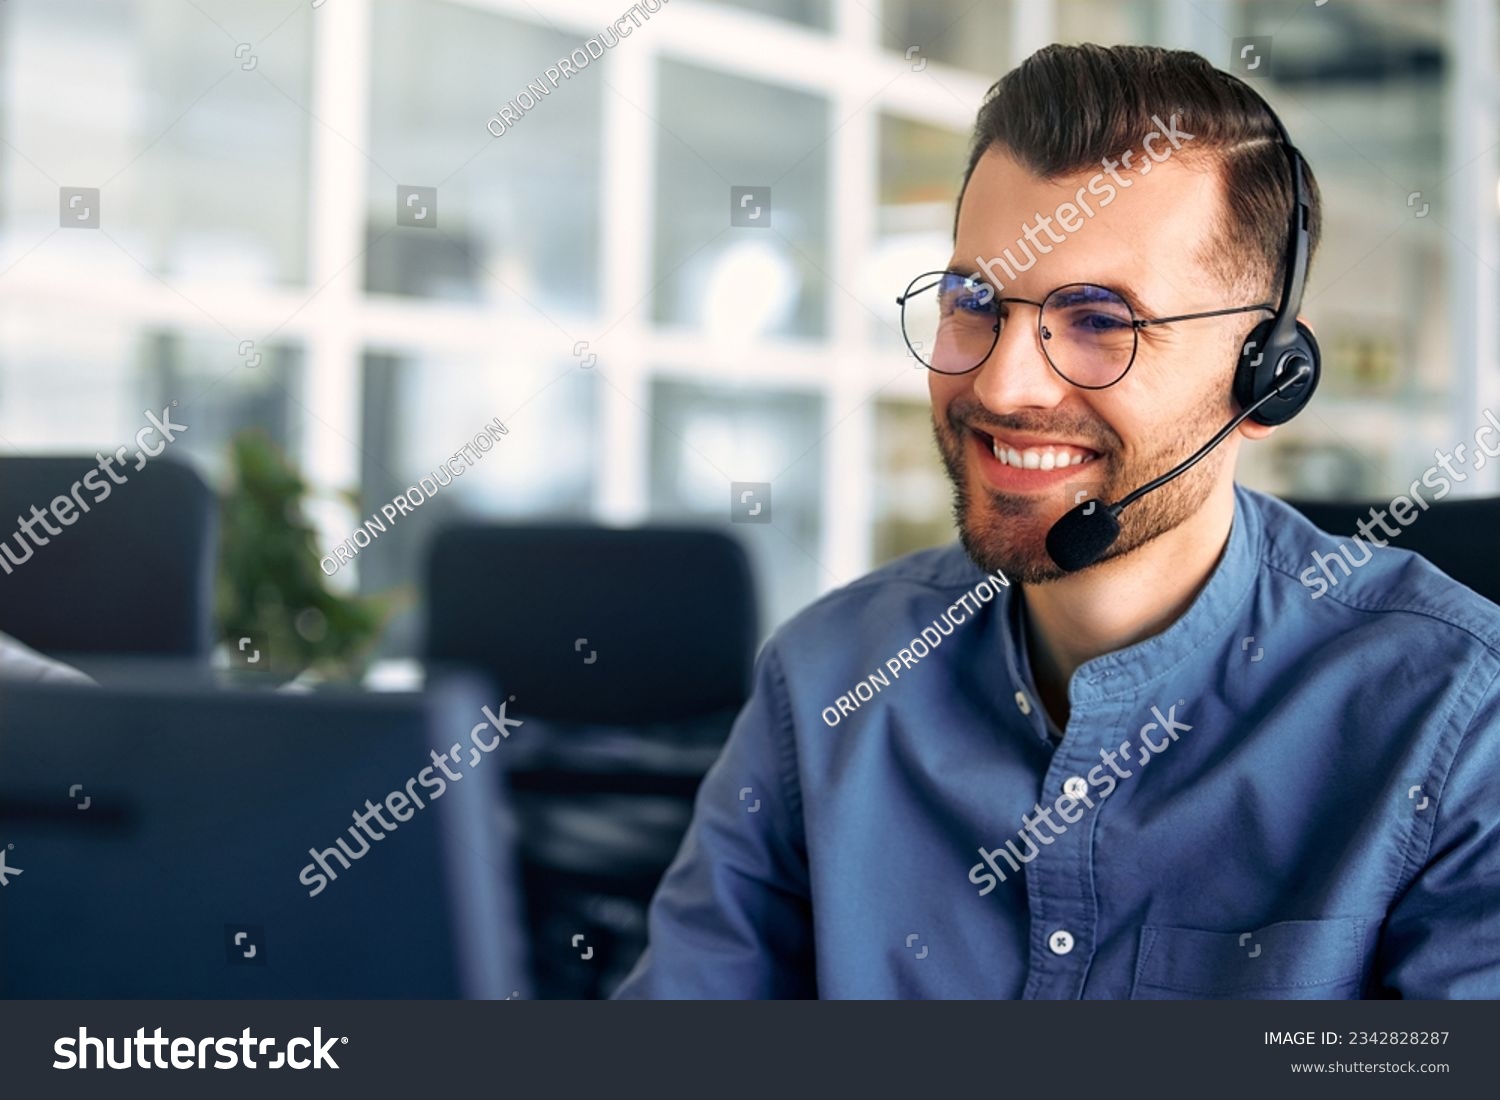 Technical support operator working with headset in office. Smiling handsome man working as call centre operator, speaking to customer. Happy businessman working remotely while doing video conference. #2342828287